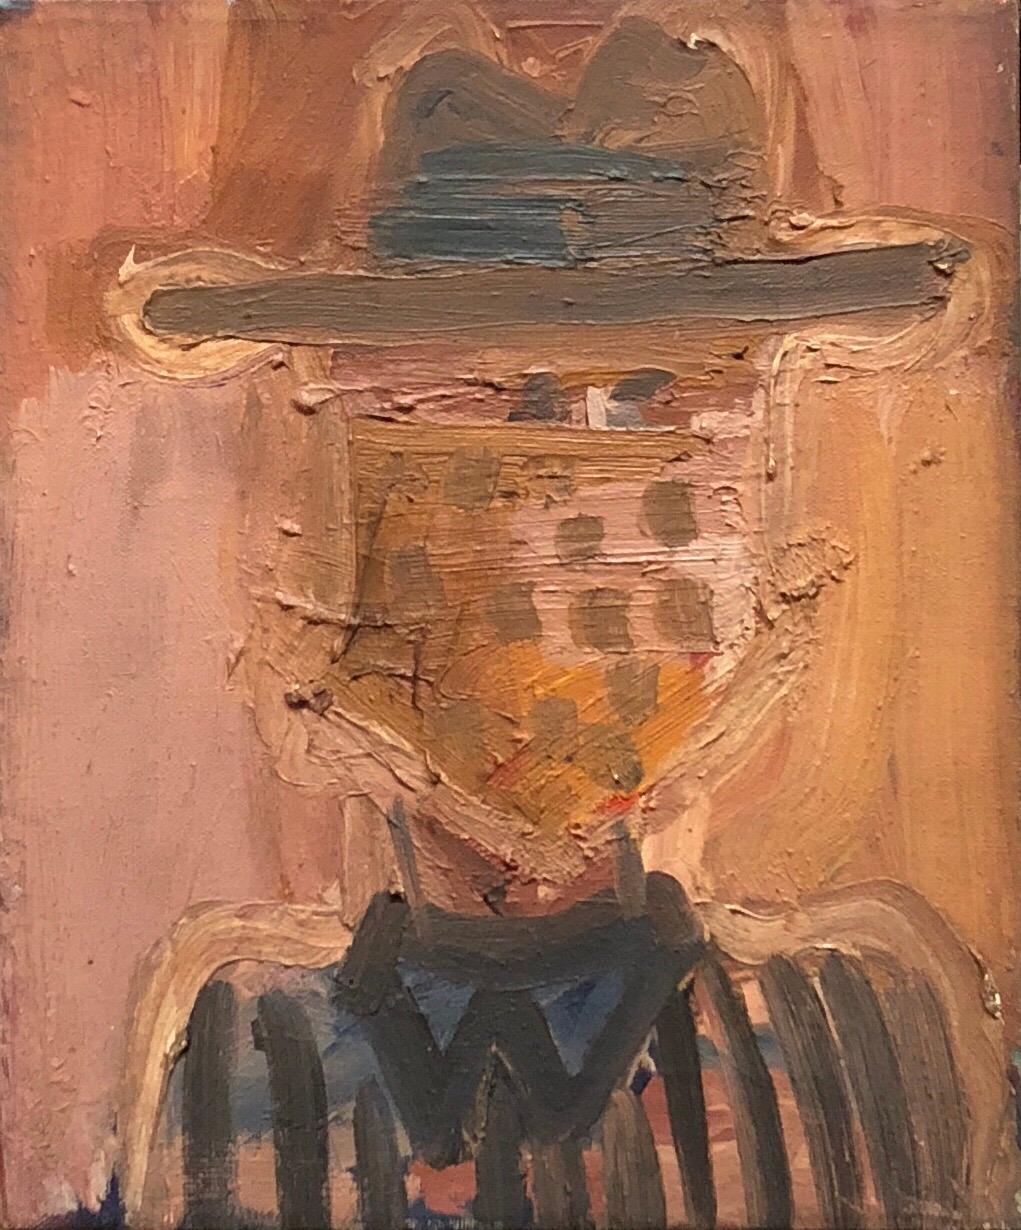 Patricia Sloane Portrait Painting - Abstract Expressionist Pop Art Oil Painting Cowboy Figure Portrait NYC 1 of 2